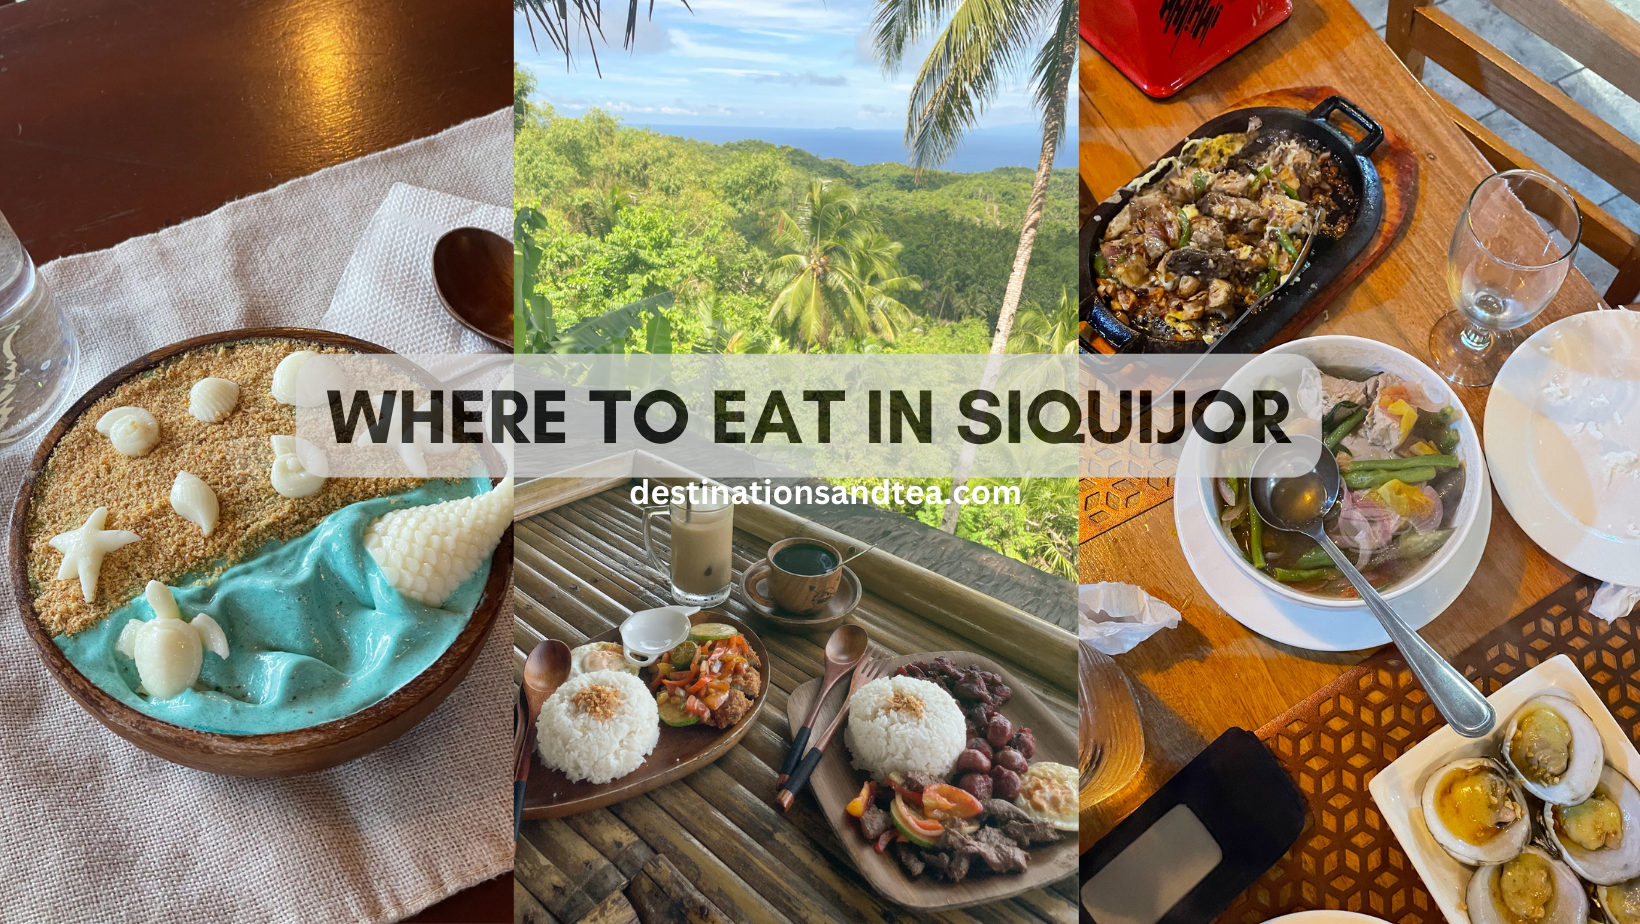 where to eat in siquijor, food guide for siquijor